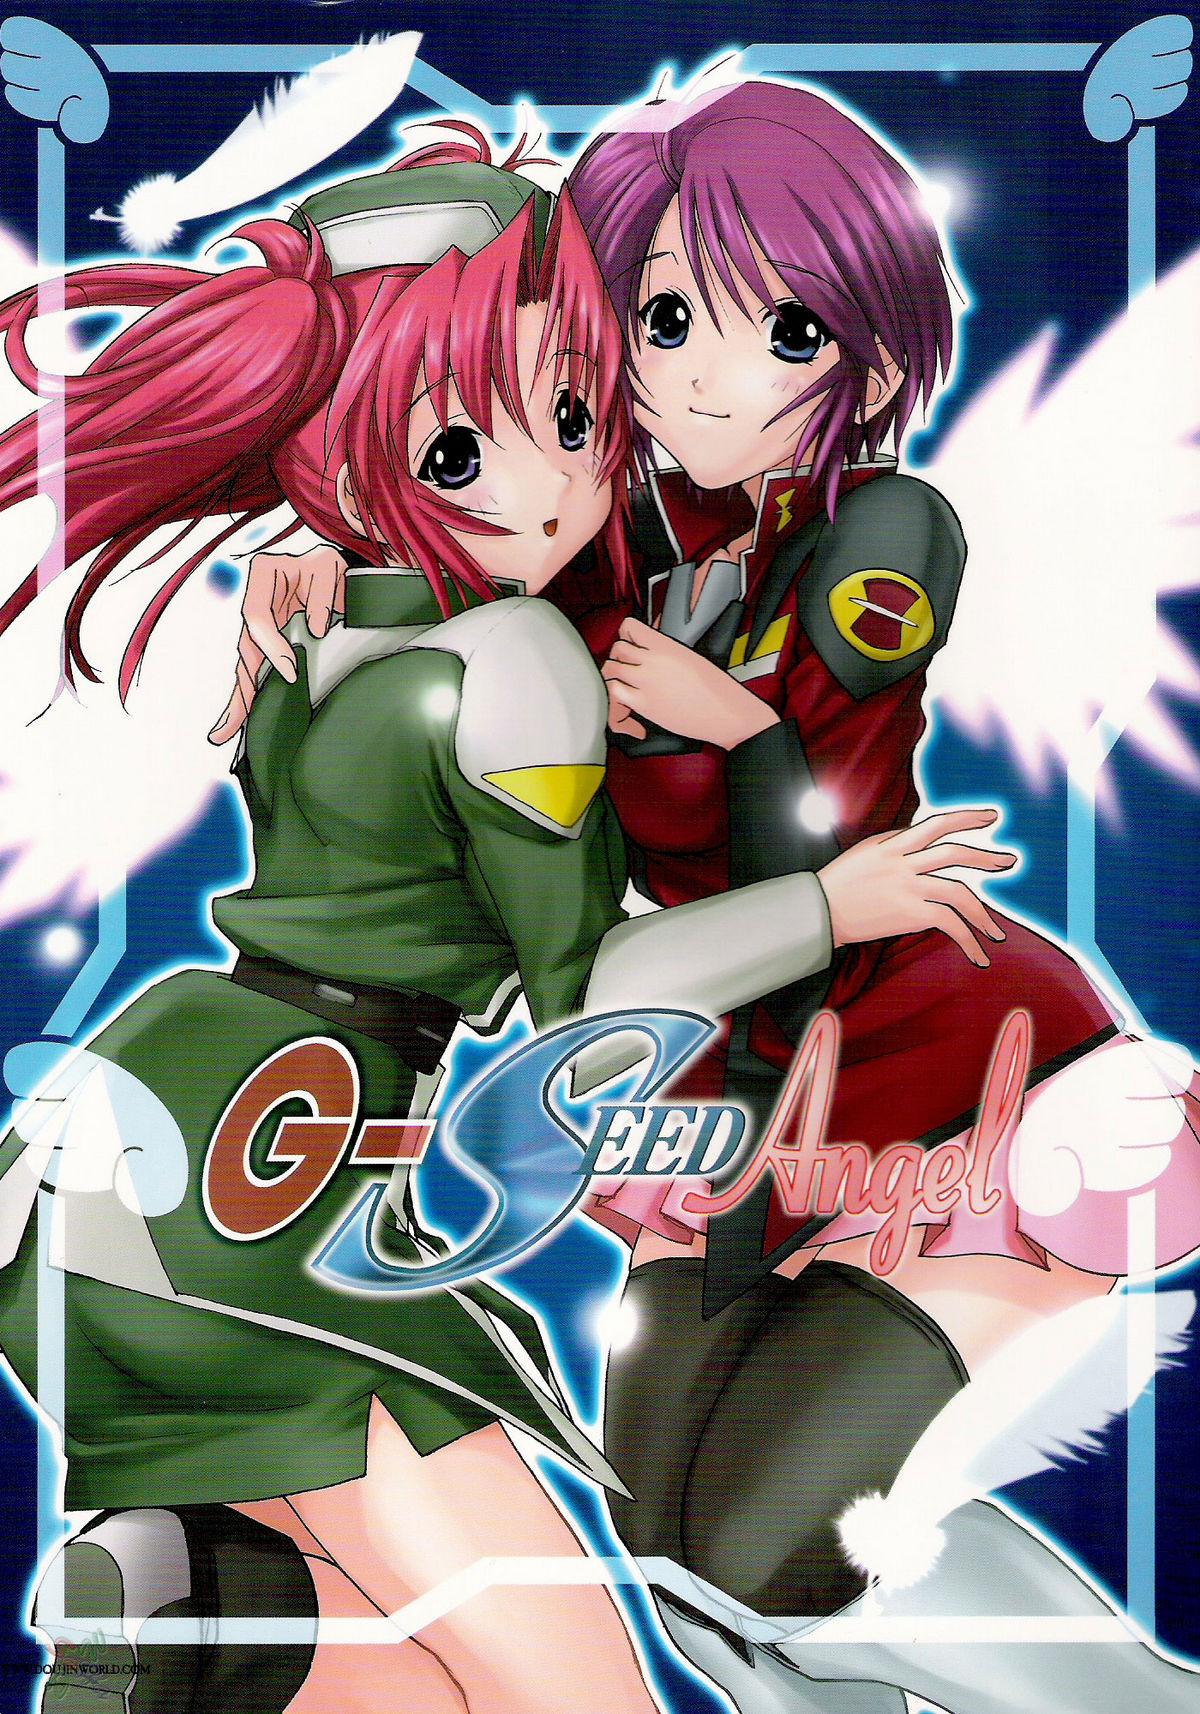 Orgasmus G-SEED Angel - Gundam seed destiny Couple Sex - Picture 1